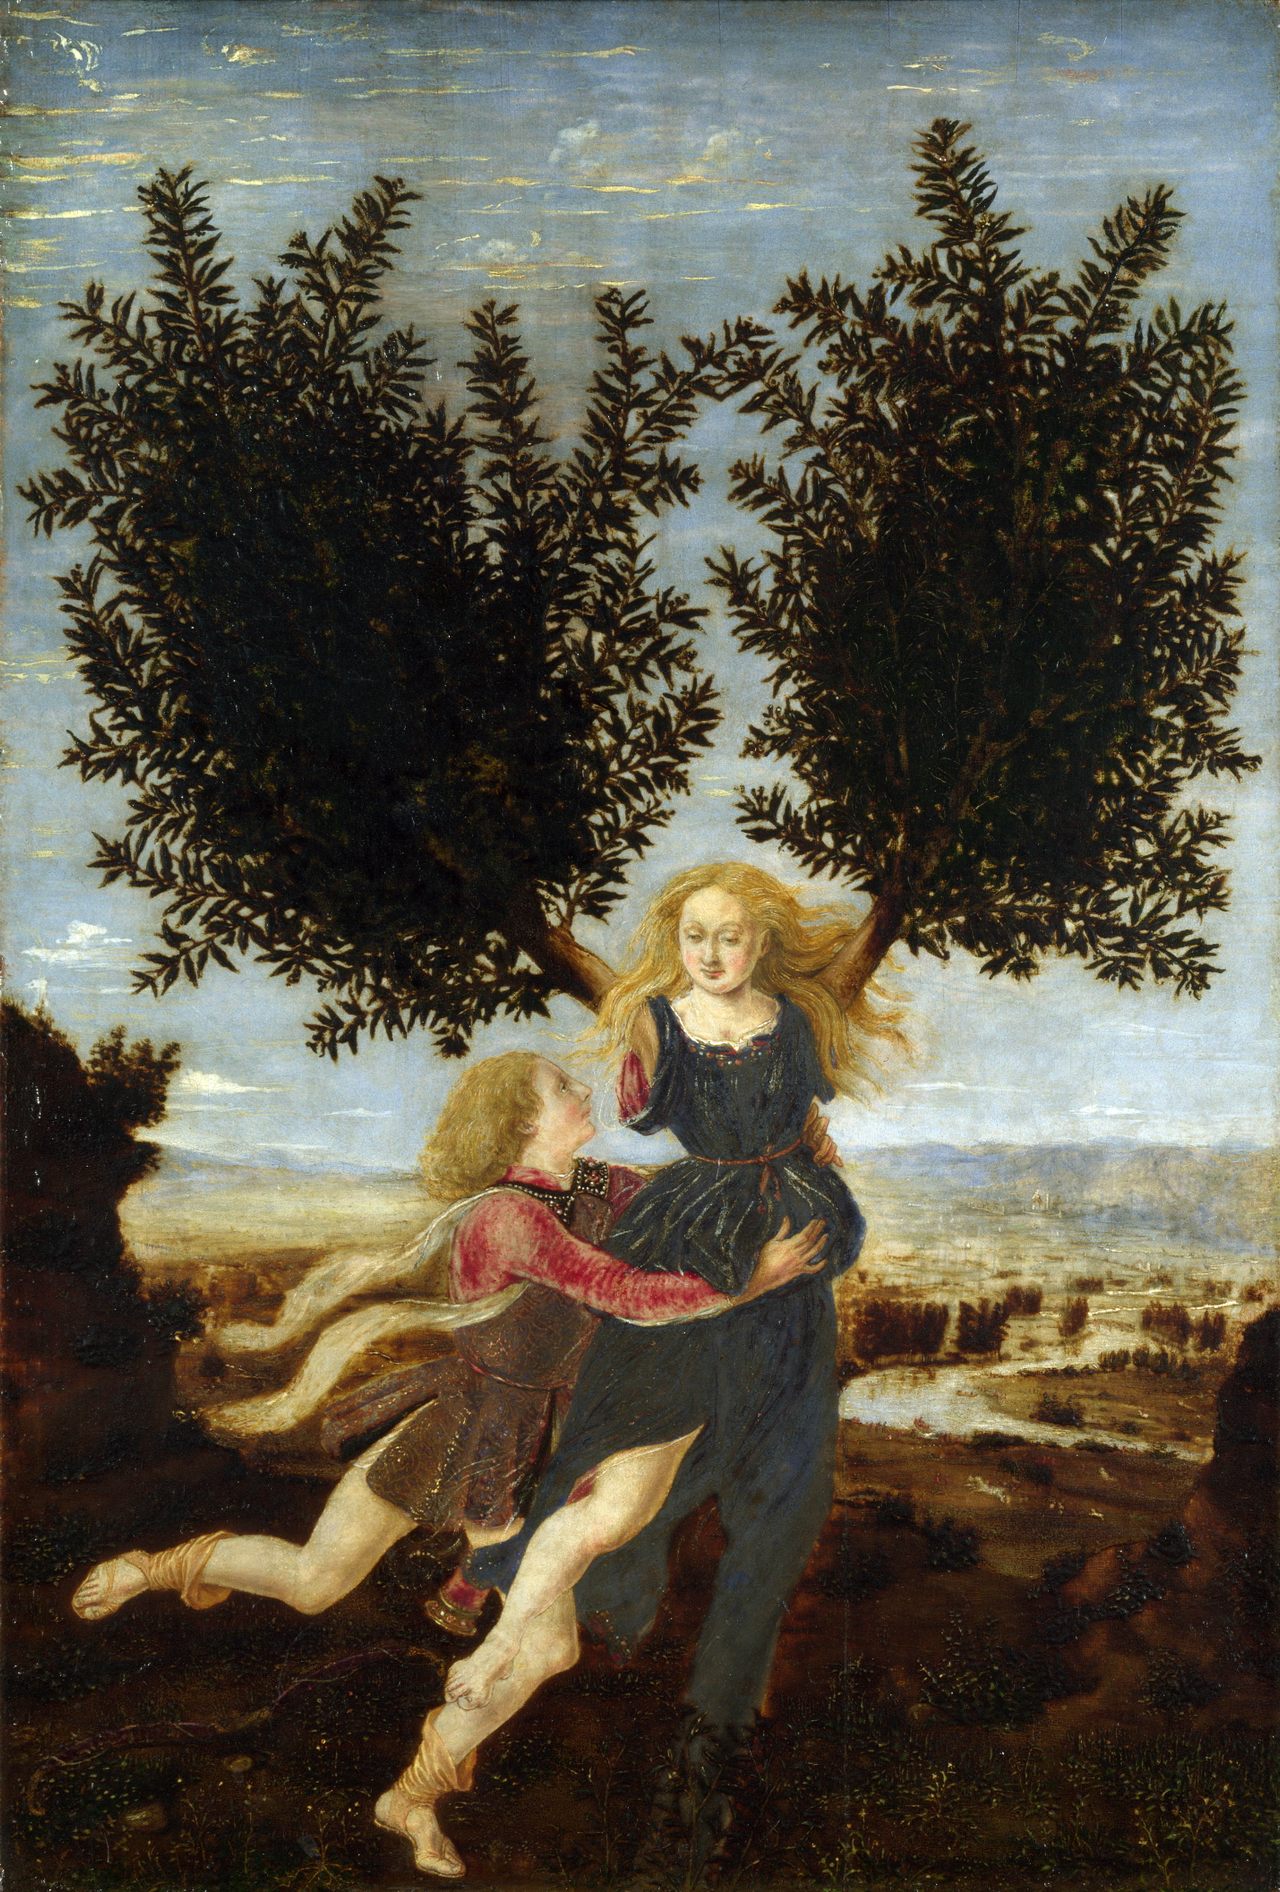 A depiction of Apollo and the nymph Daphne turning into a laurel.